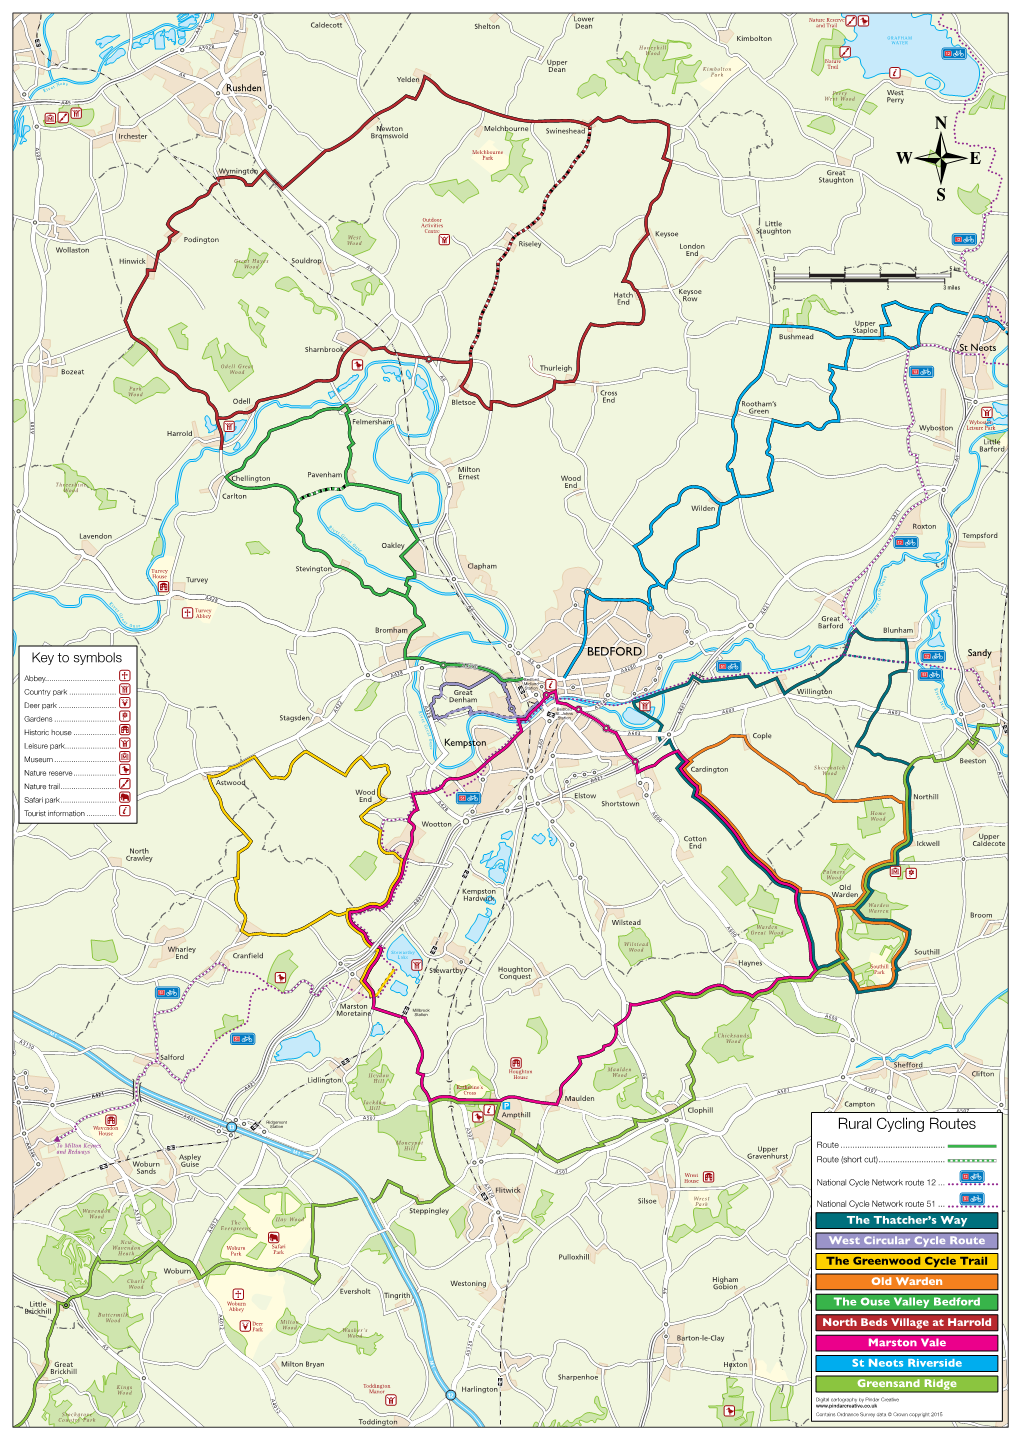 Rural Cycling Routes 5 House 0 7 a Moneypot 1 4 0 to Milton Keynes Route